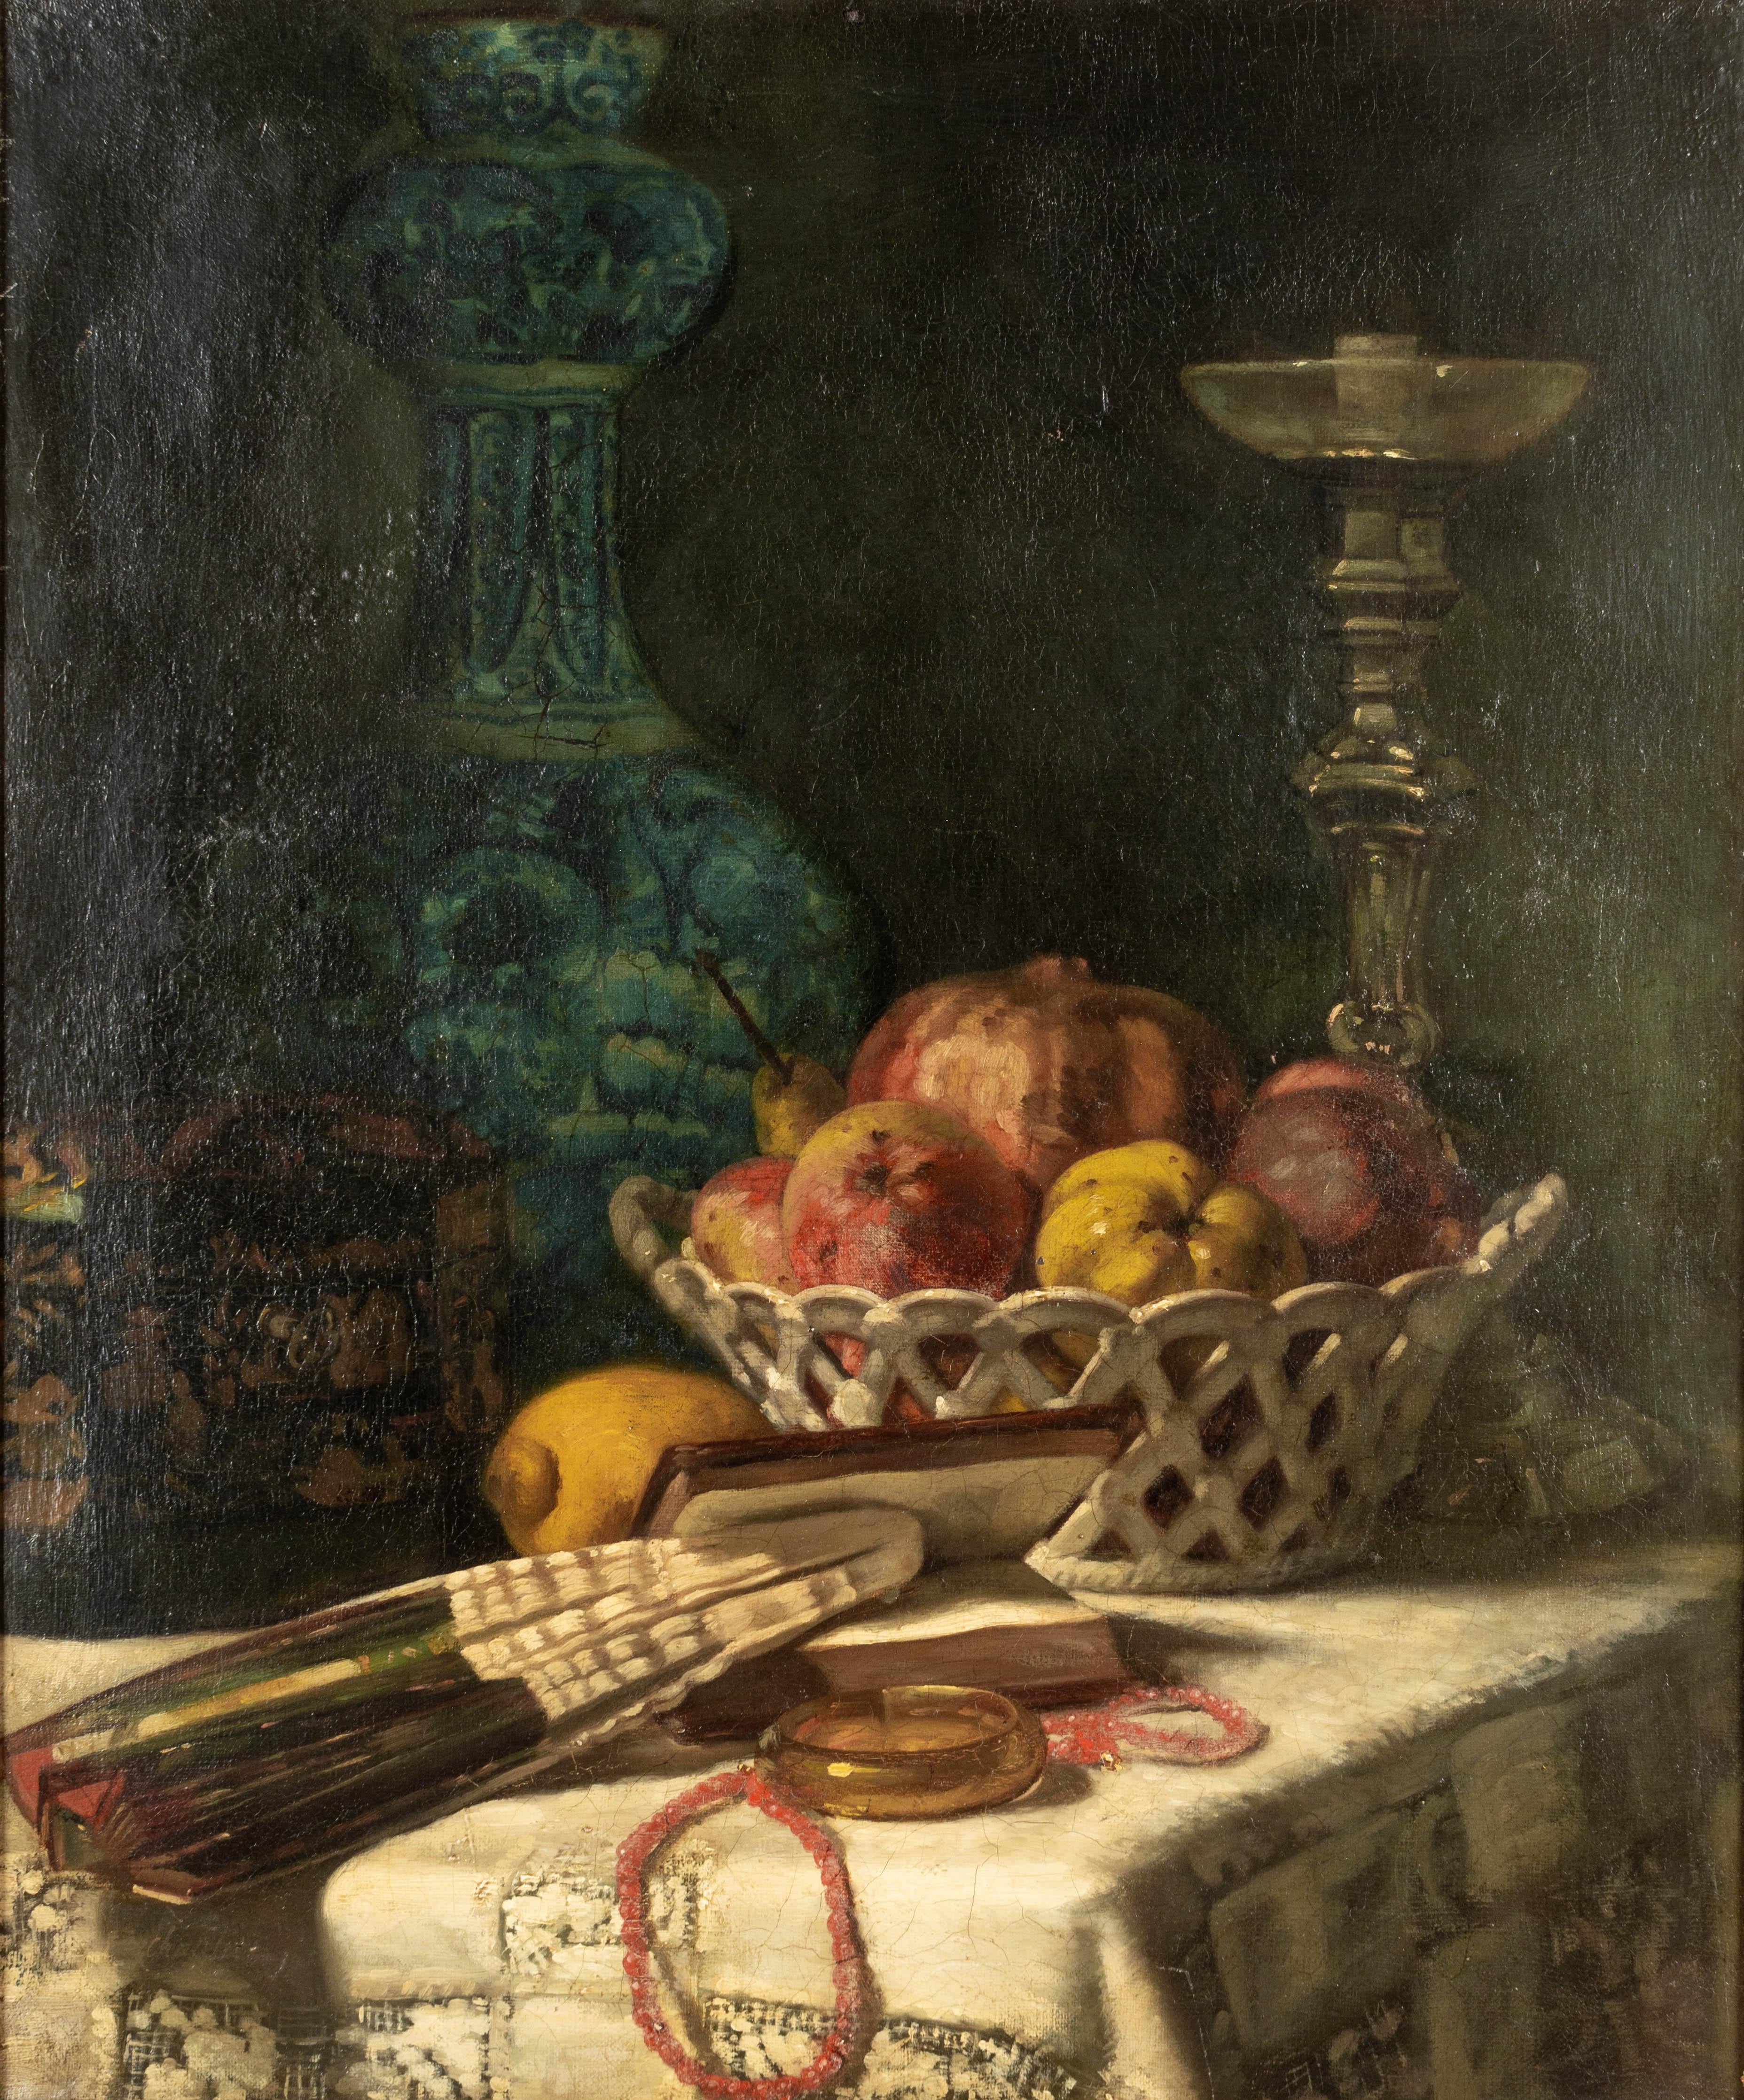 A late 19th Century French School still life in the style of Fantin-Latour. A well-executed Impressionist style oil on canvas depicting detailed objects of an opulent household: a ceramic basket weave bowl of apples, a lady's fan propping open a